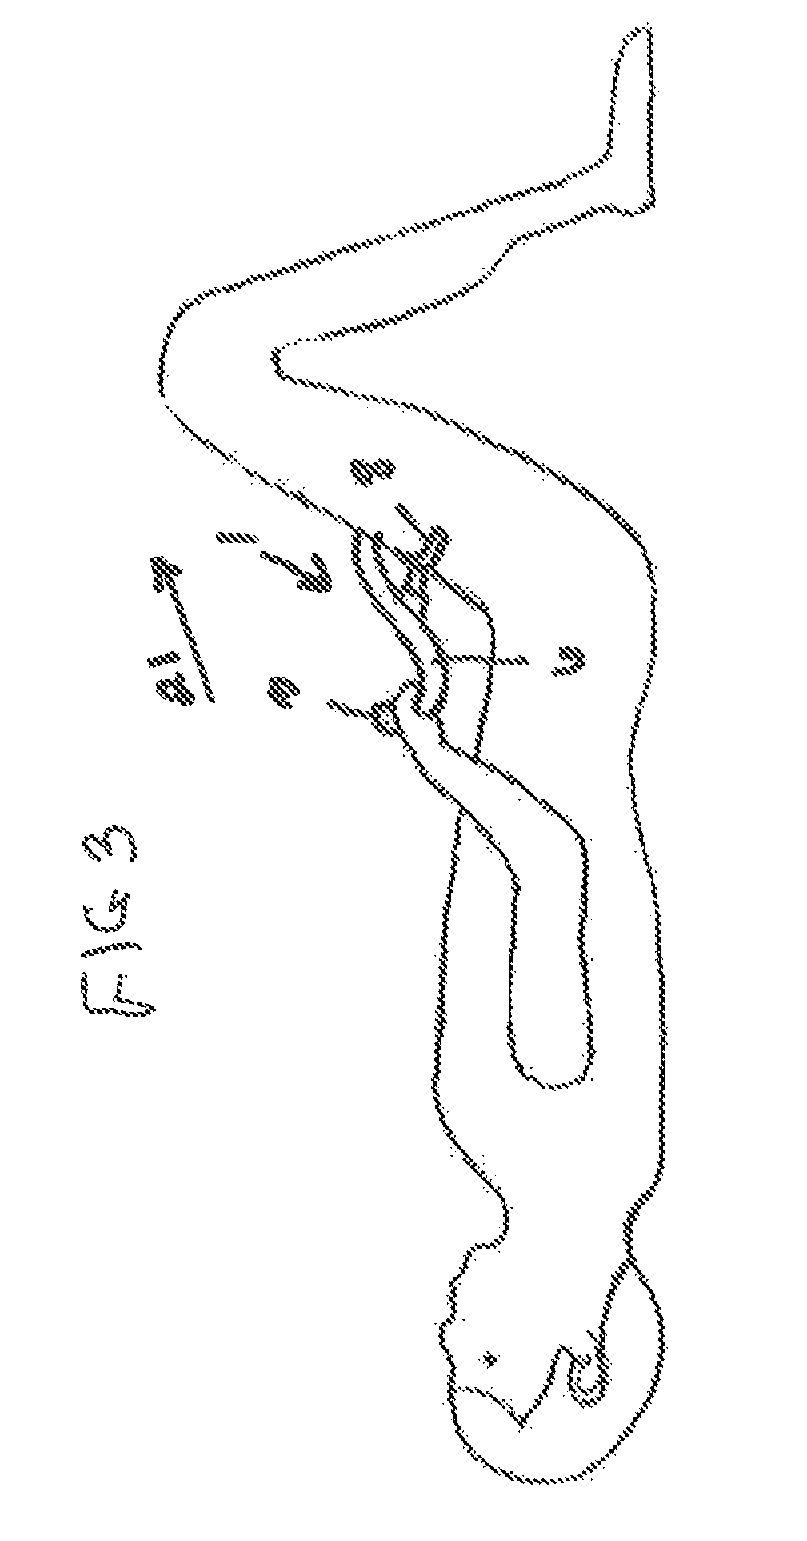 Simple portable lumbar spine distraction device and method